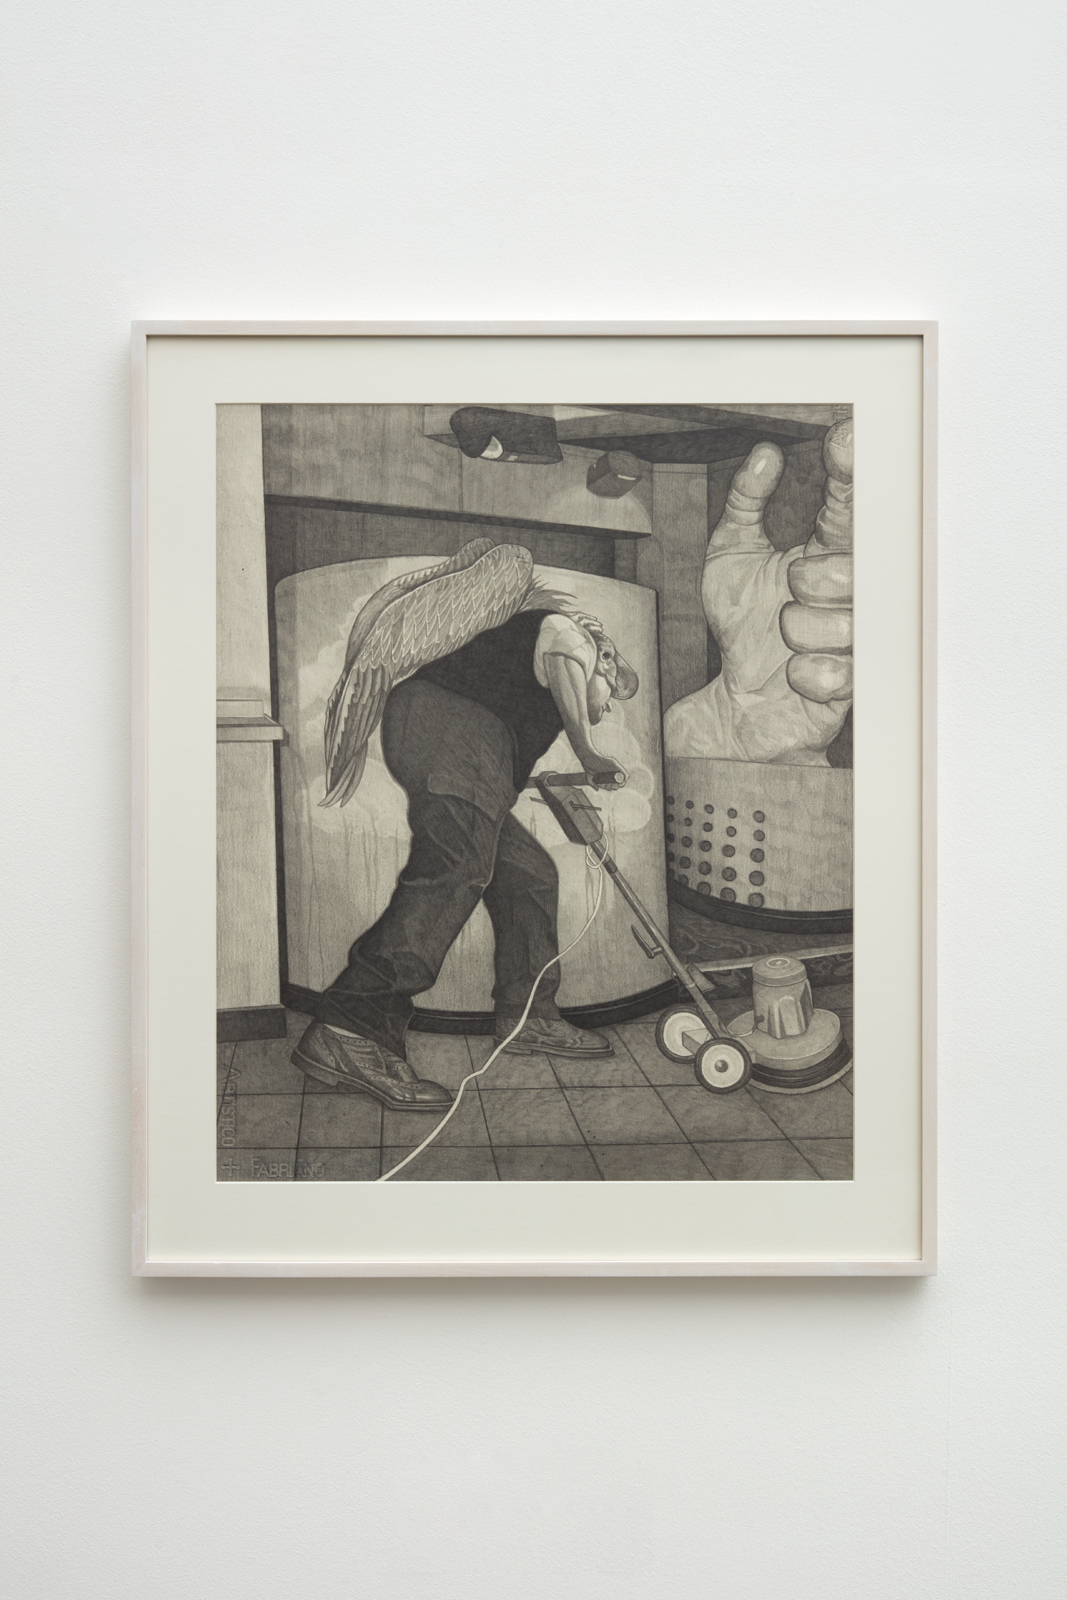 Paul Anthony Harford, Untitled (Cleaner with Vulture Wings), ca. 2002. Graphite on paper, 69.4 x 56.9 cm. Â© the Estate of Paul Anthony Harford. Photo by Robert Glowacki. Courtesy Sadie Coles HQ, London